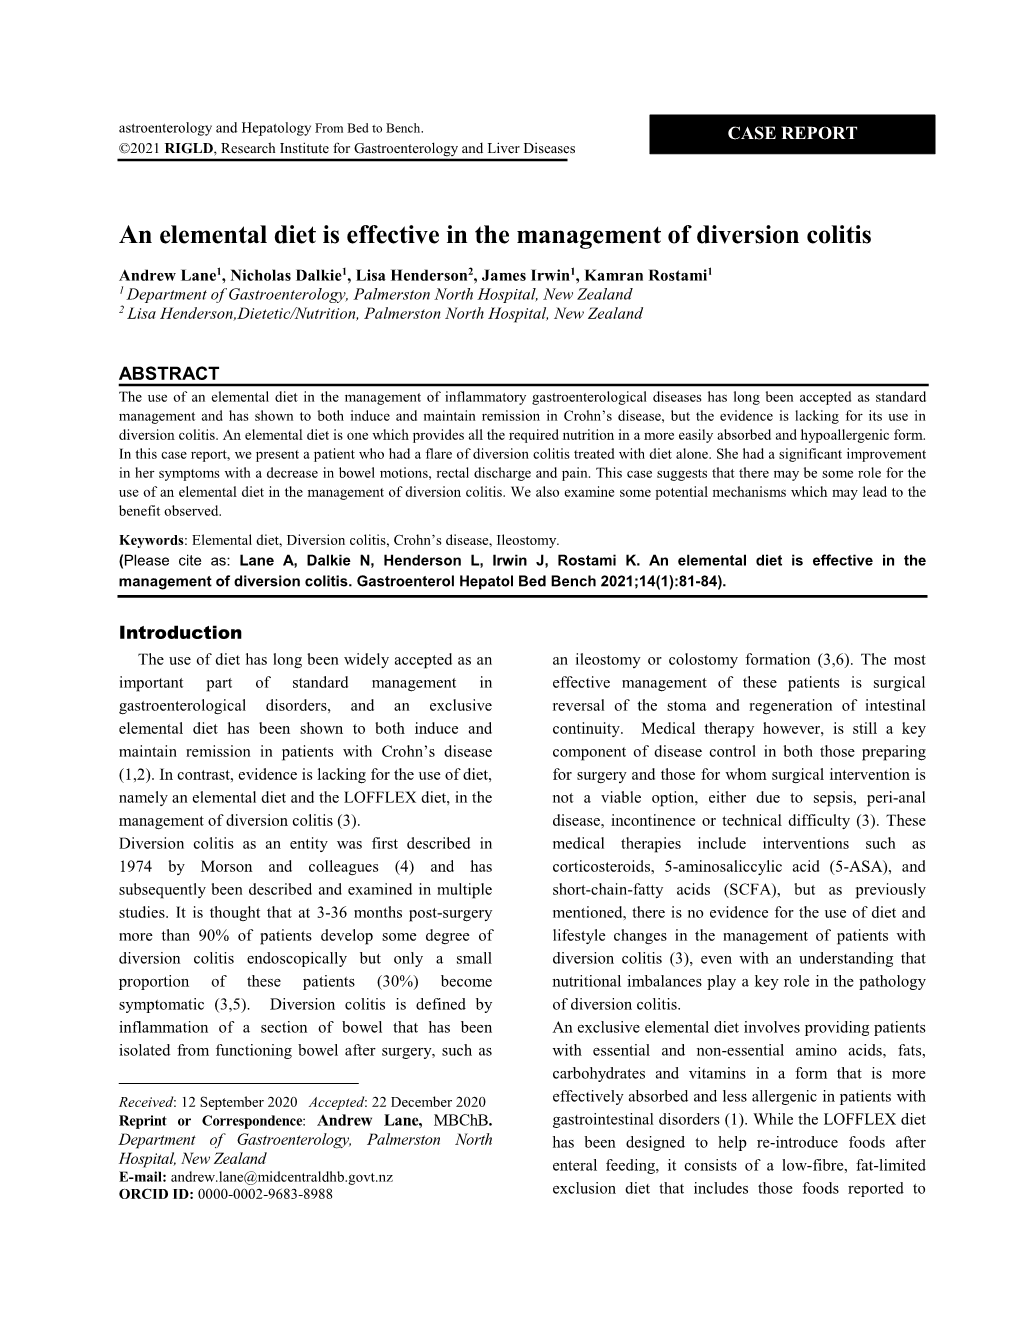 An Elemental Diet Is Effective in the Management of Diversion Colitis